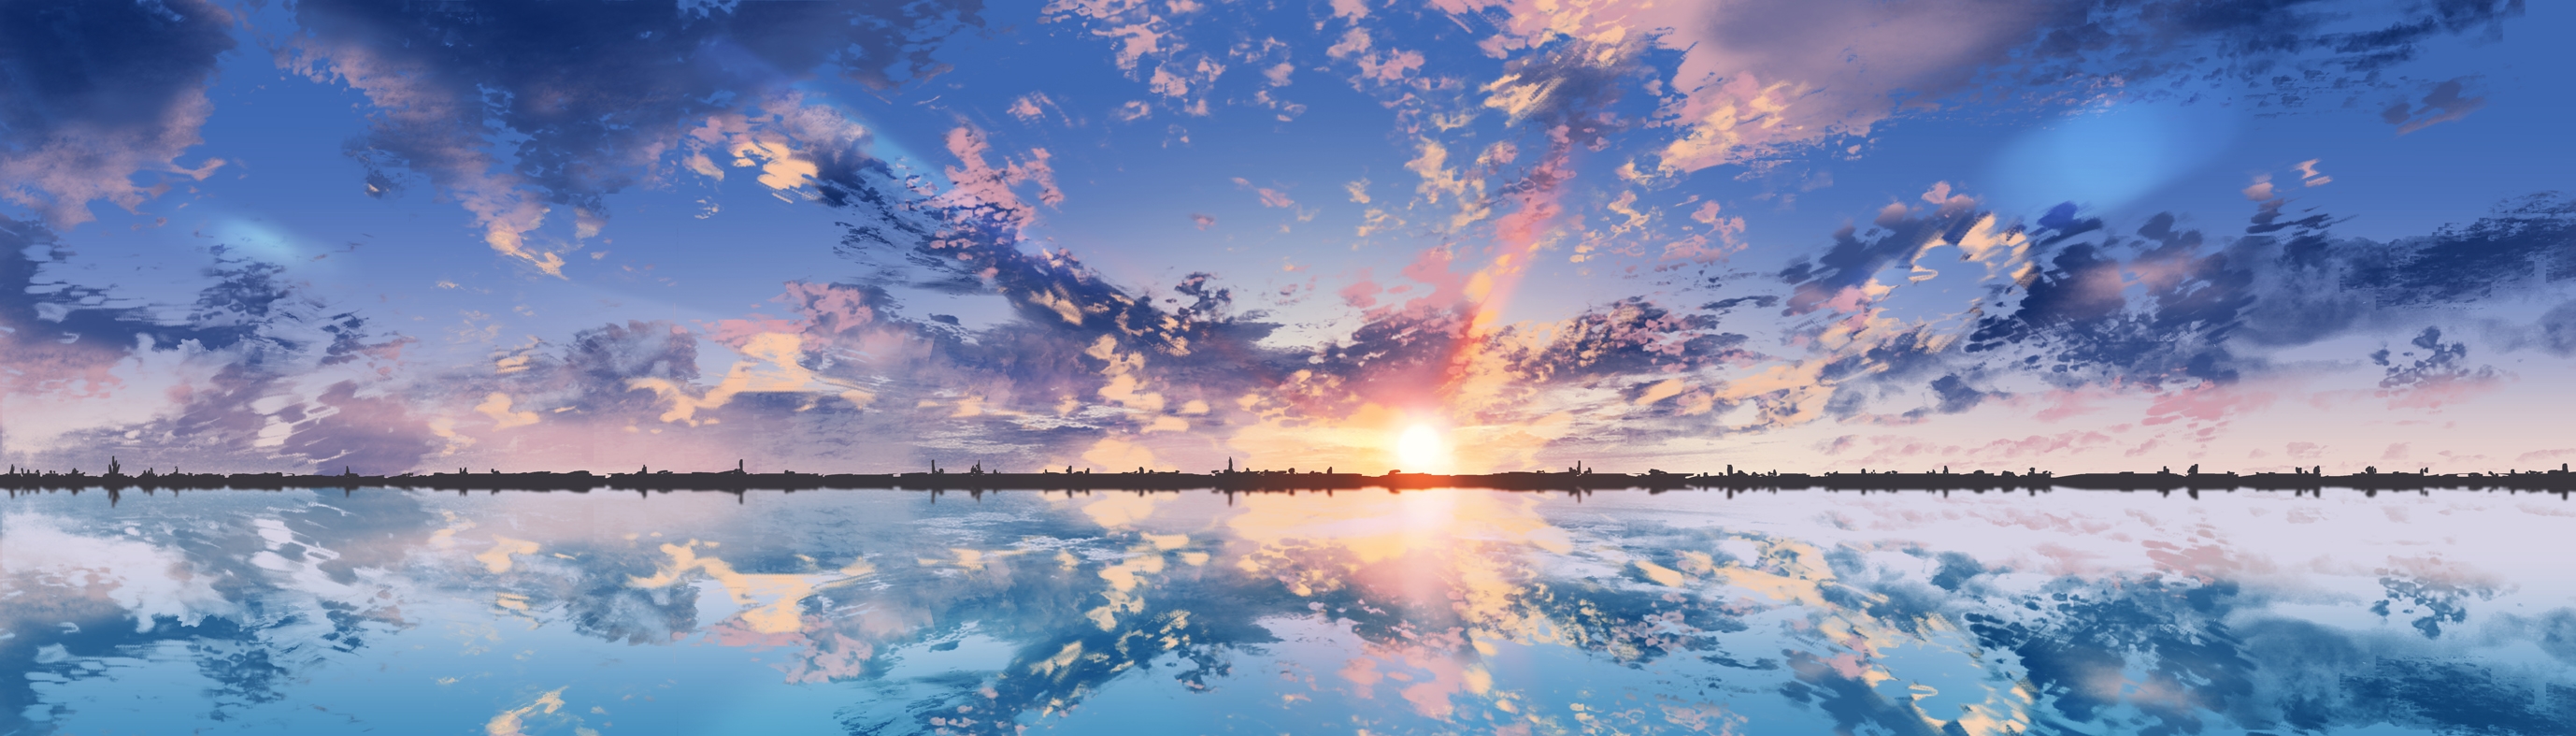 Anime Scenic, Clouds, Sunset, Reflection, Dual Monitor Monitor Wallpaper Scenery